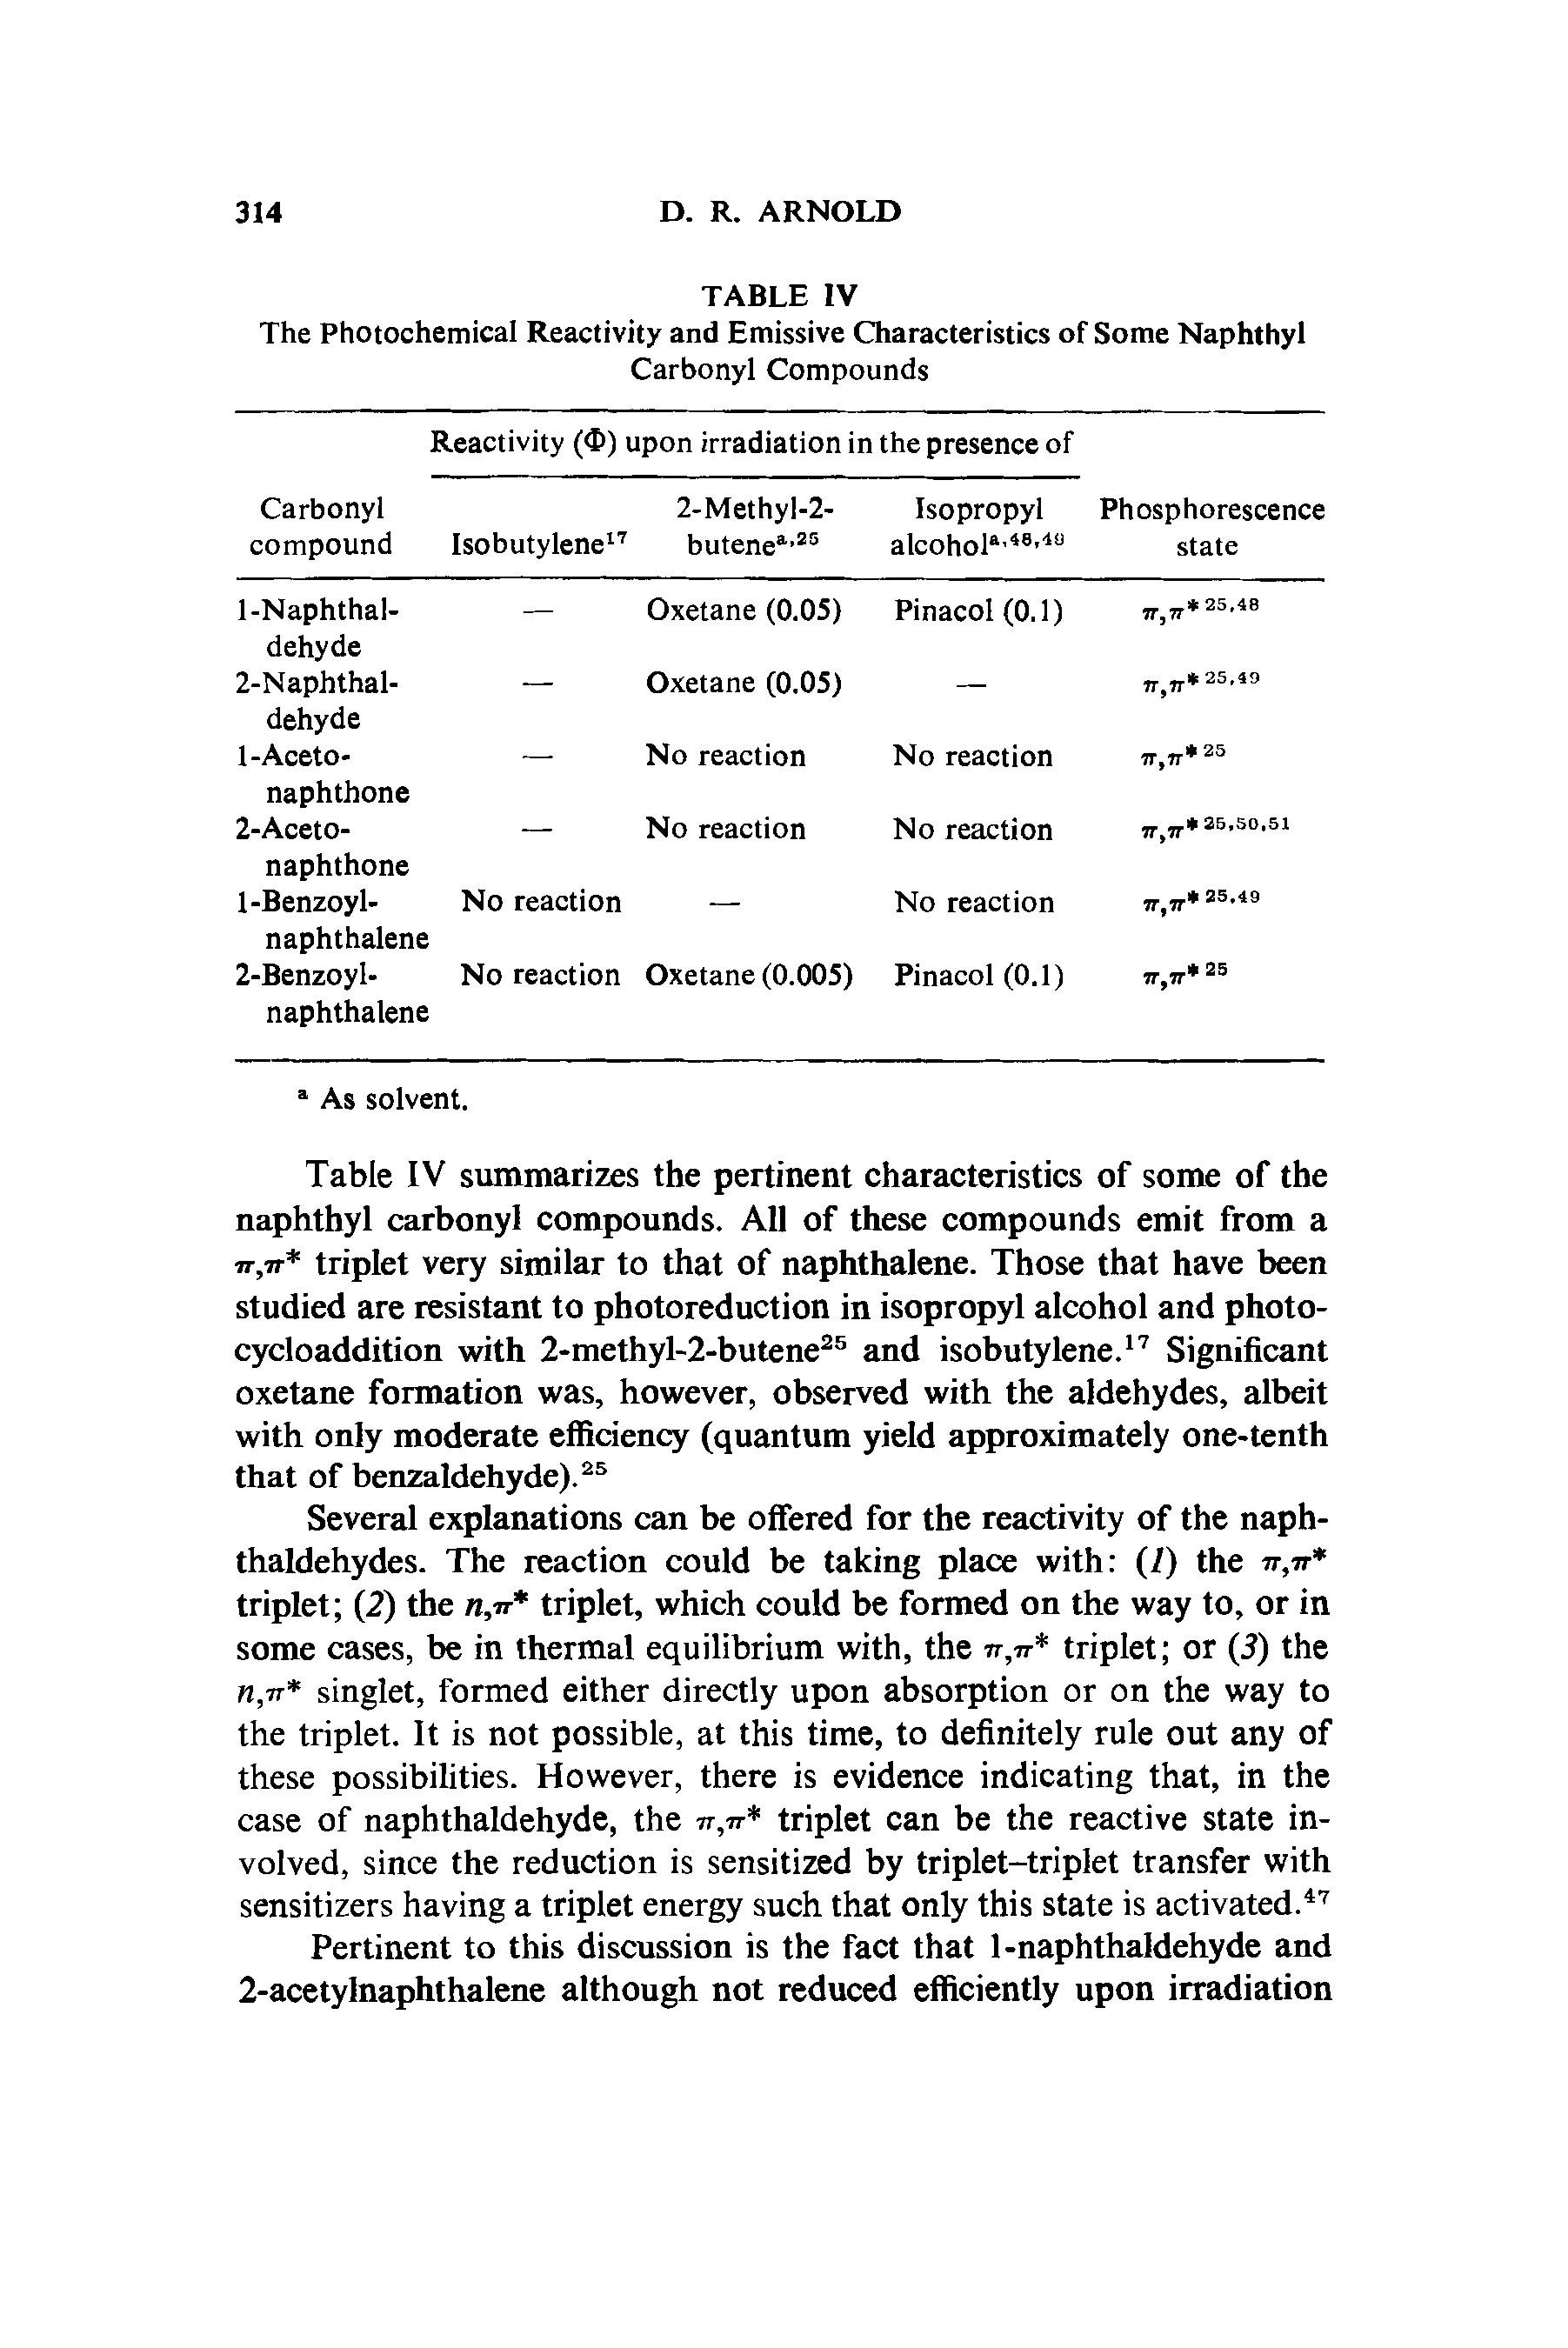 Table IV summarizes the pertinent characteristics of some of the naphthyl carbonyl compounds. All of these compounds emit from a it,7T triplet very similar to that of naphthalene. Those that have been studied are resistant to photoreduction in isopropyl alcohol and photocycloaddition with 2-methyl-2-butene25 and isobutylene.17 Significant oxetane formation was, however, observed with the aldehydes, albeit with only moderate efficiency (quantum yield approximately one-tenth that of benzaldehyde).25...